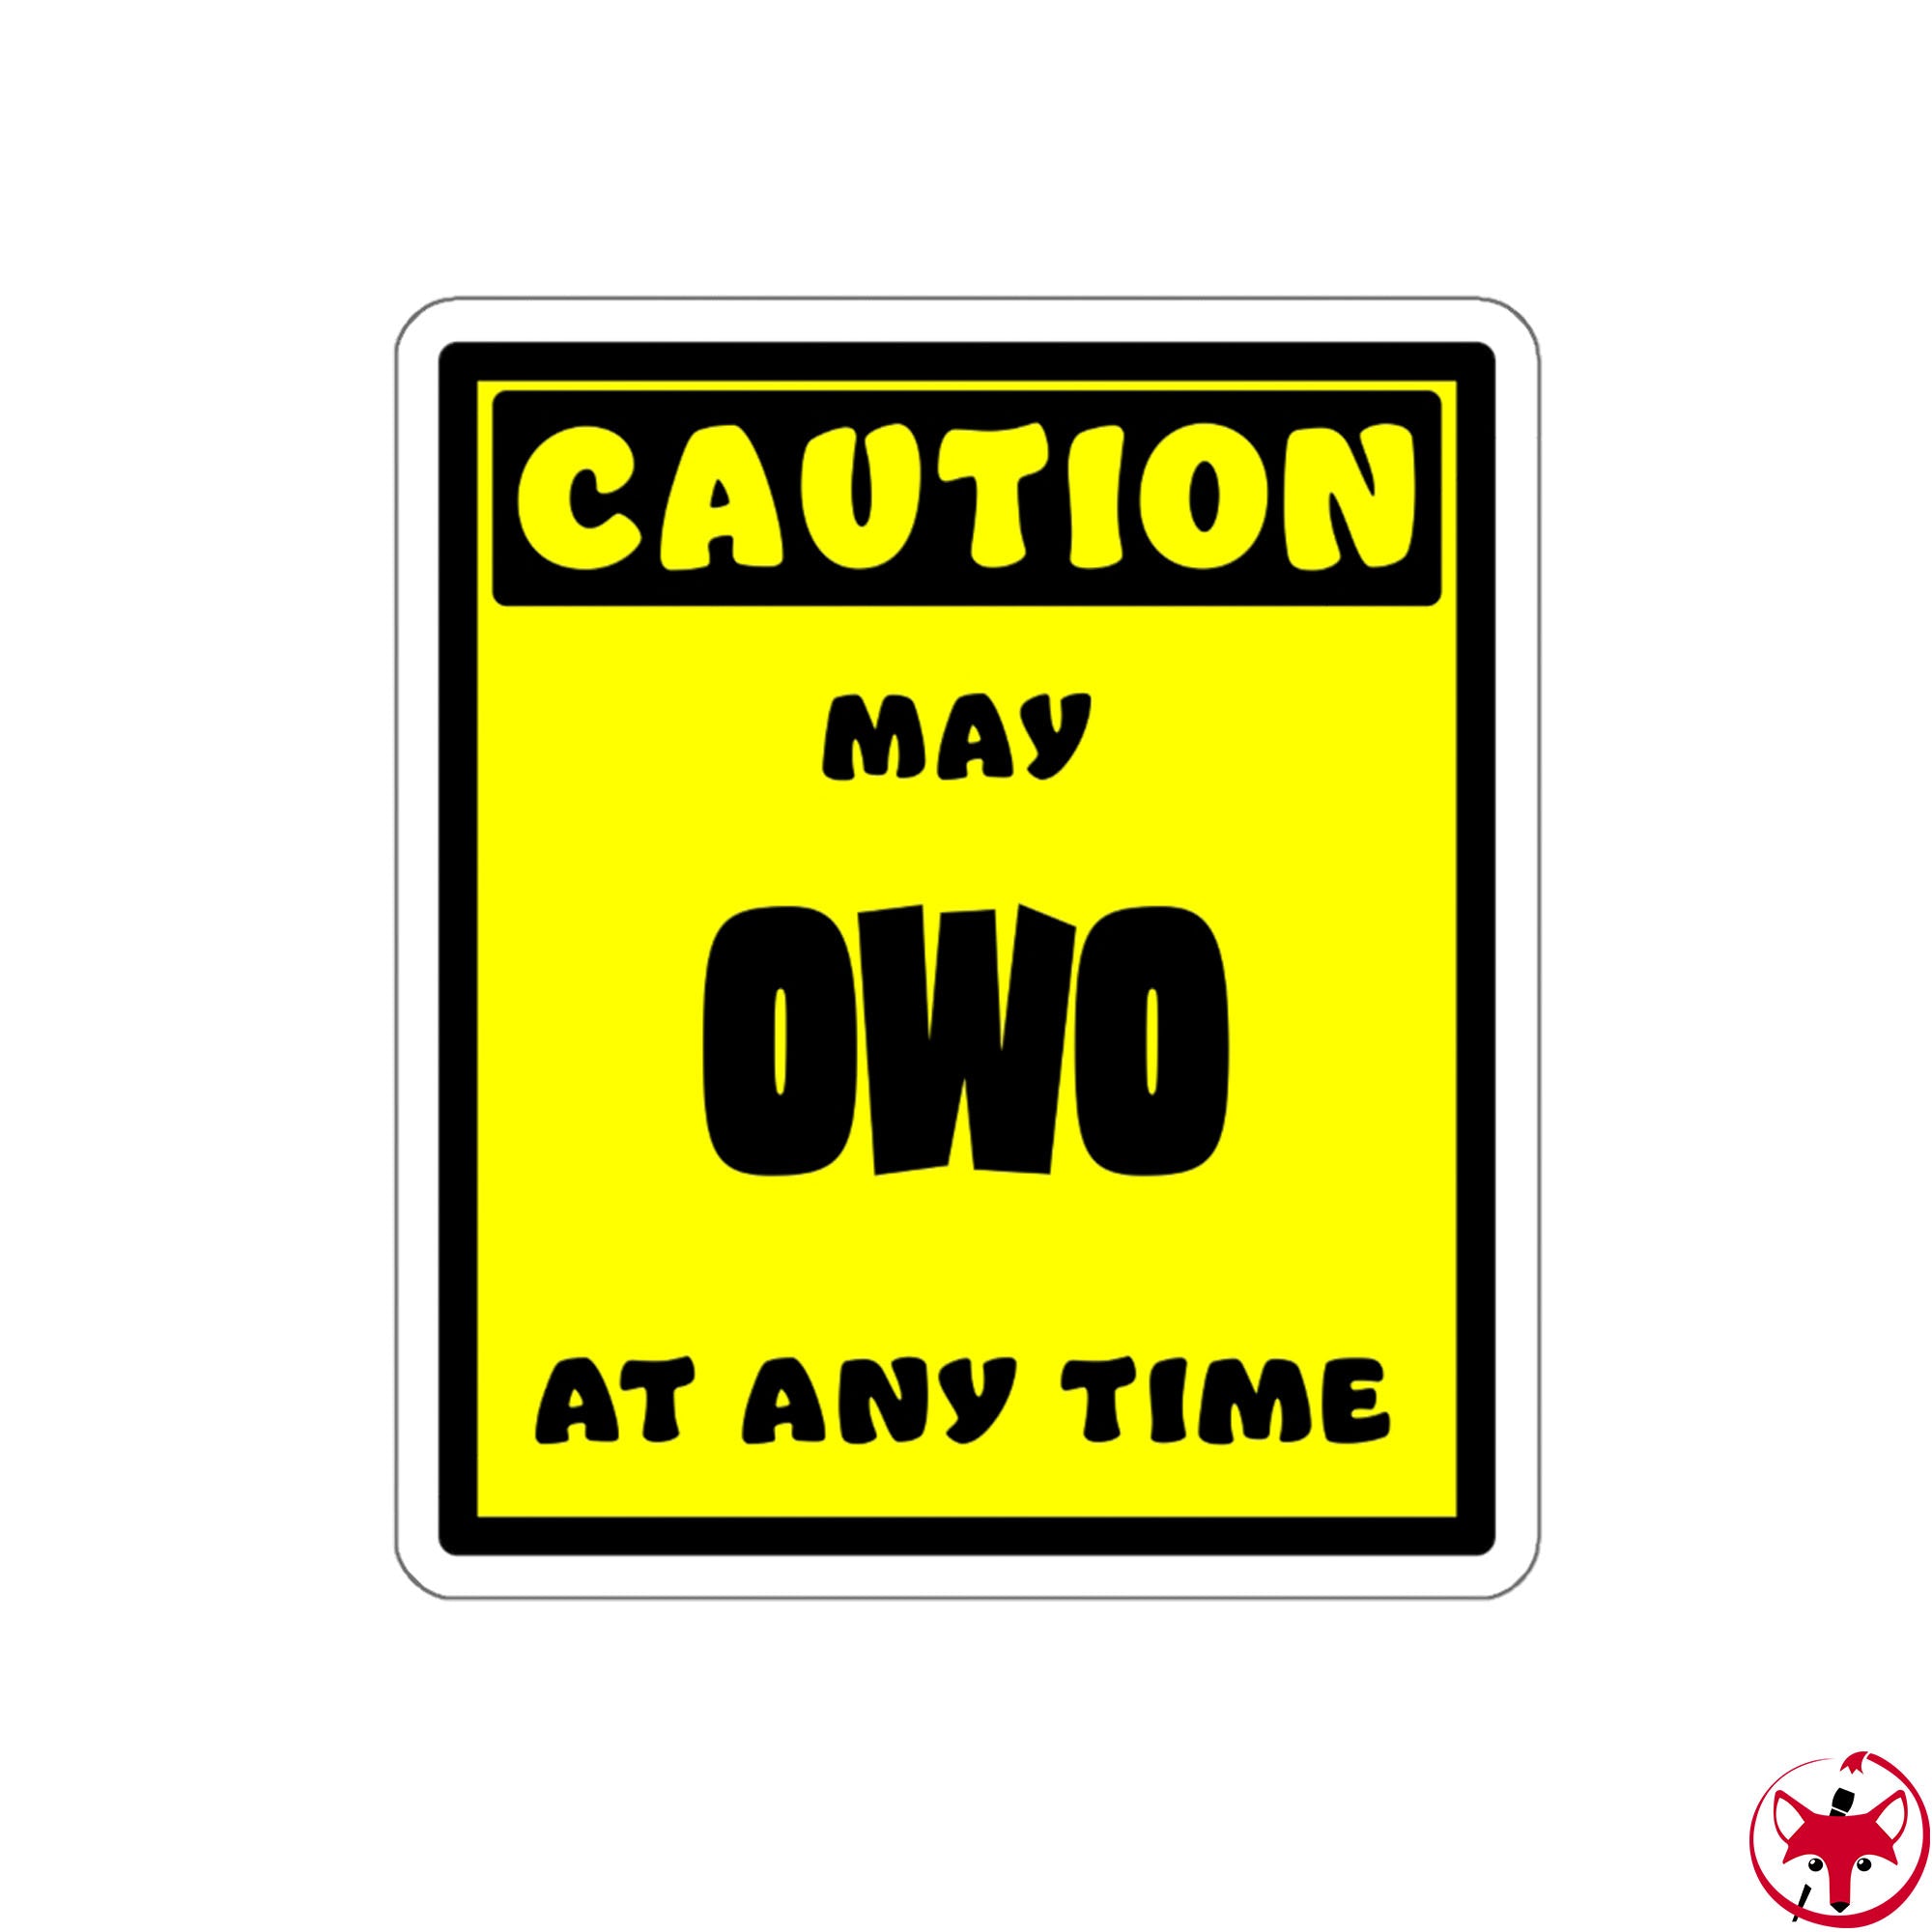 CAUTION! May OWO at any time! - Sticker Sticker AFLT-Whootorca 